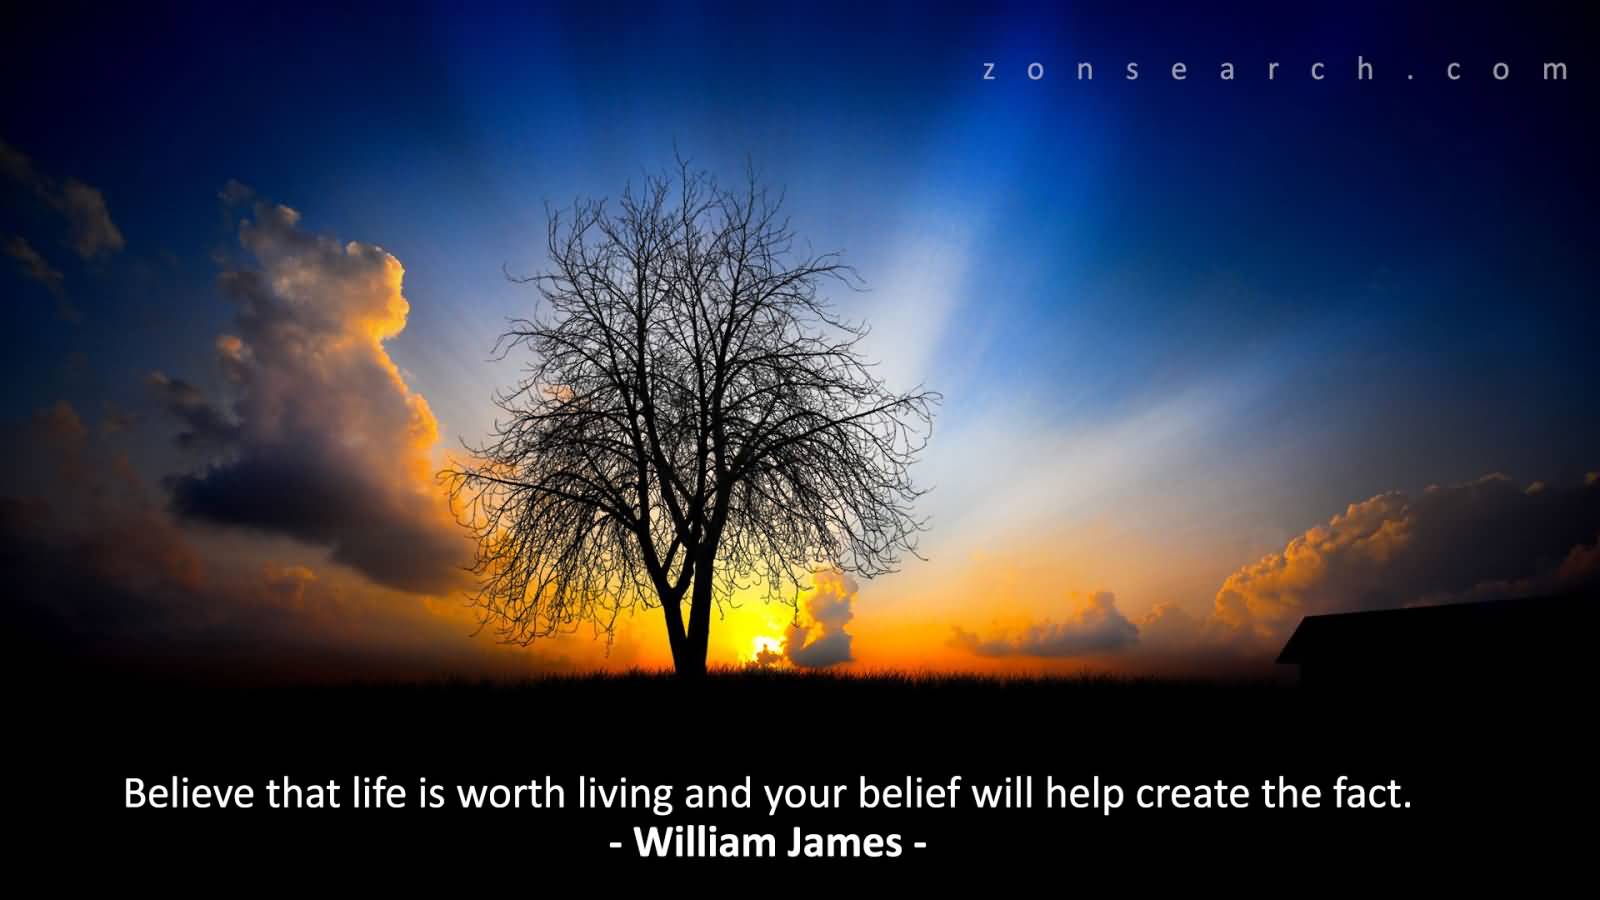 Believe that life is worth living and your belief will help create the fact  -  William James